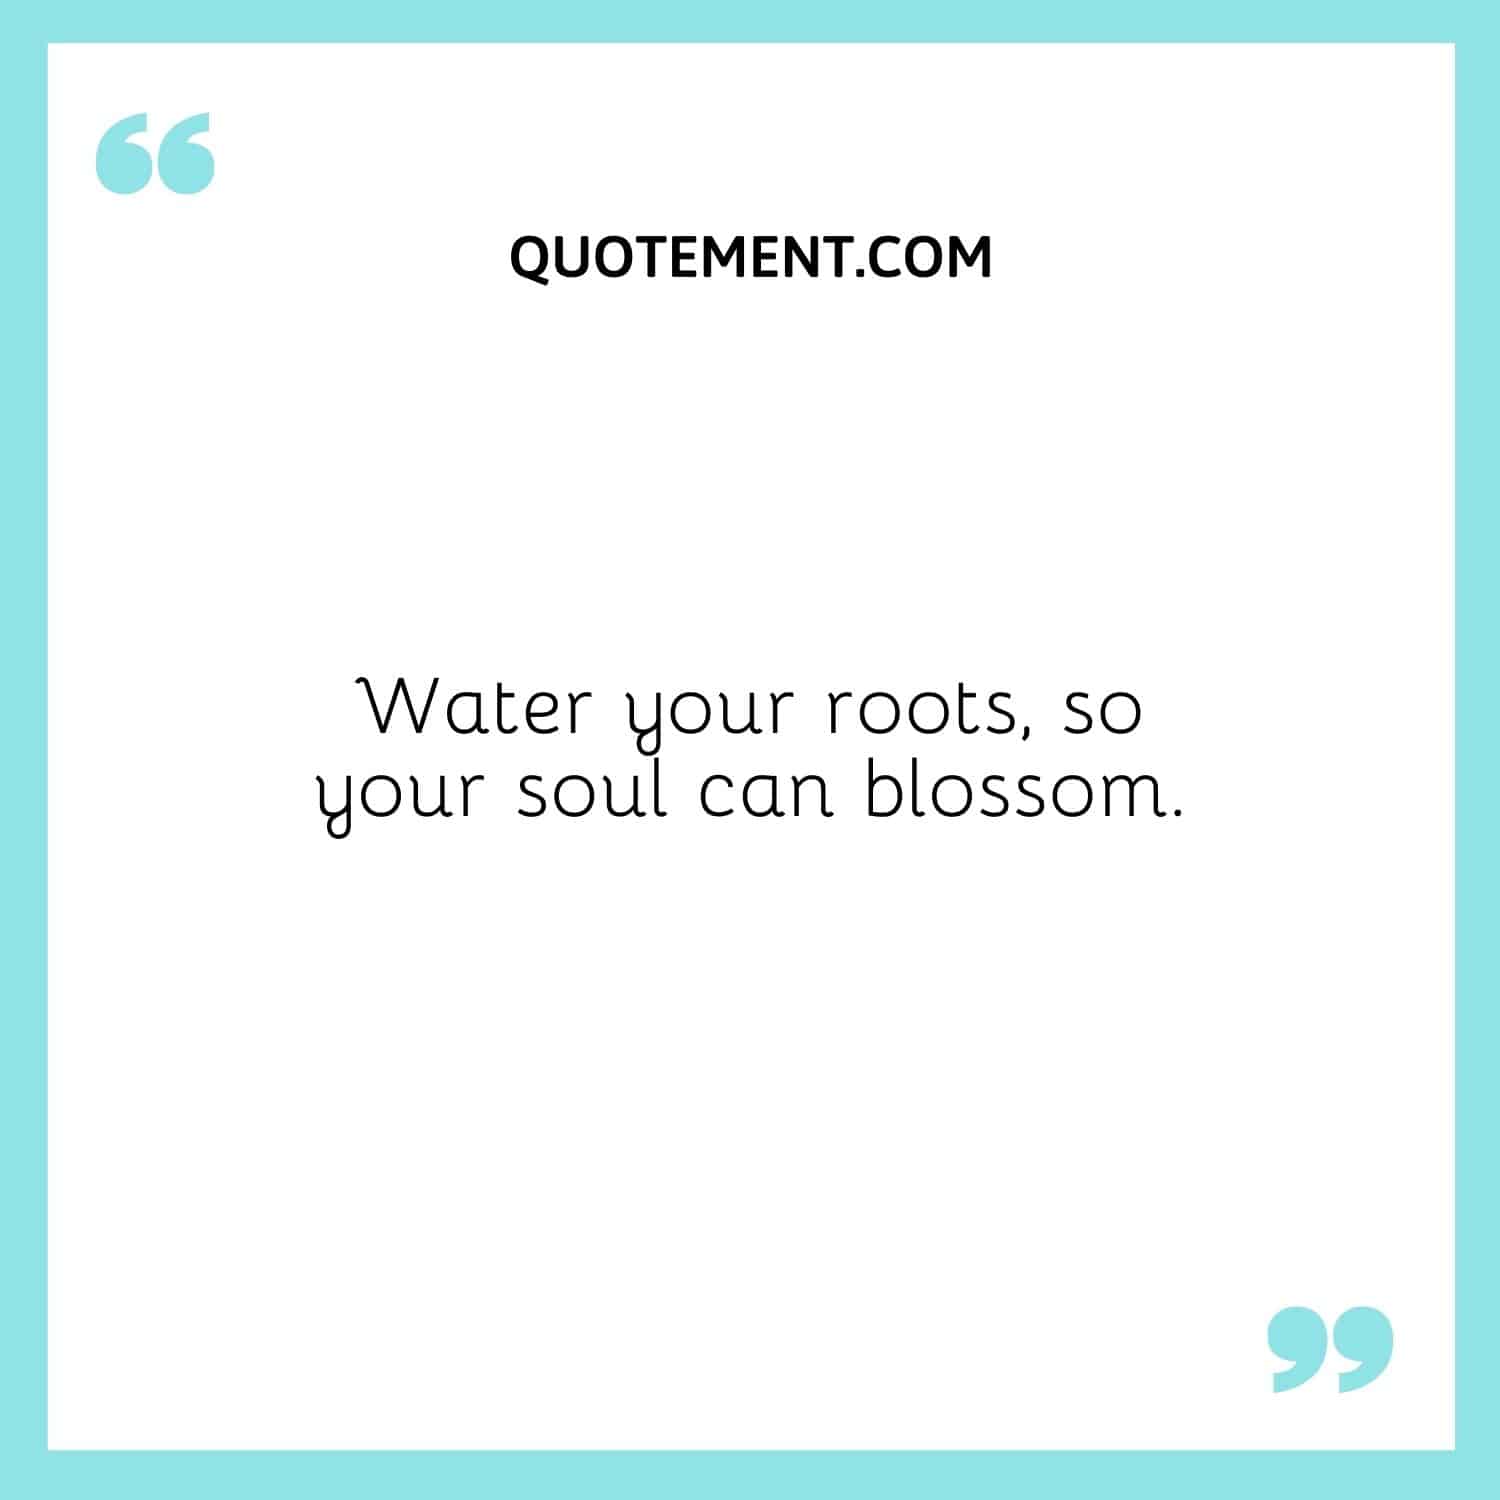 Water your roots, so your soul can blossom.